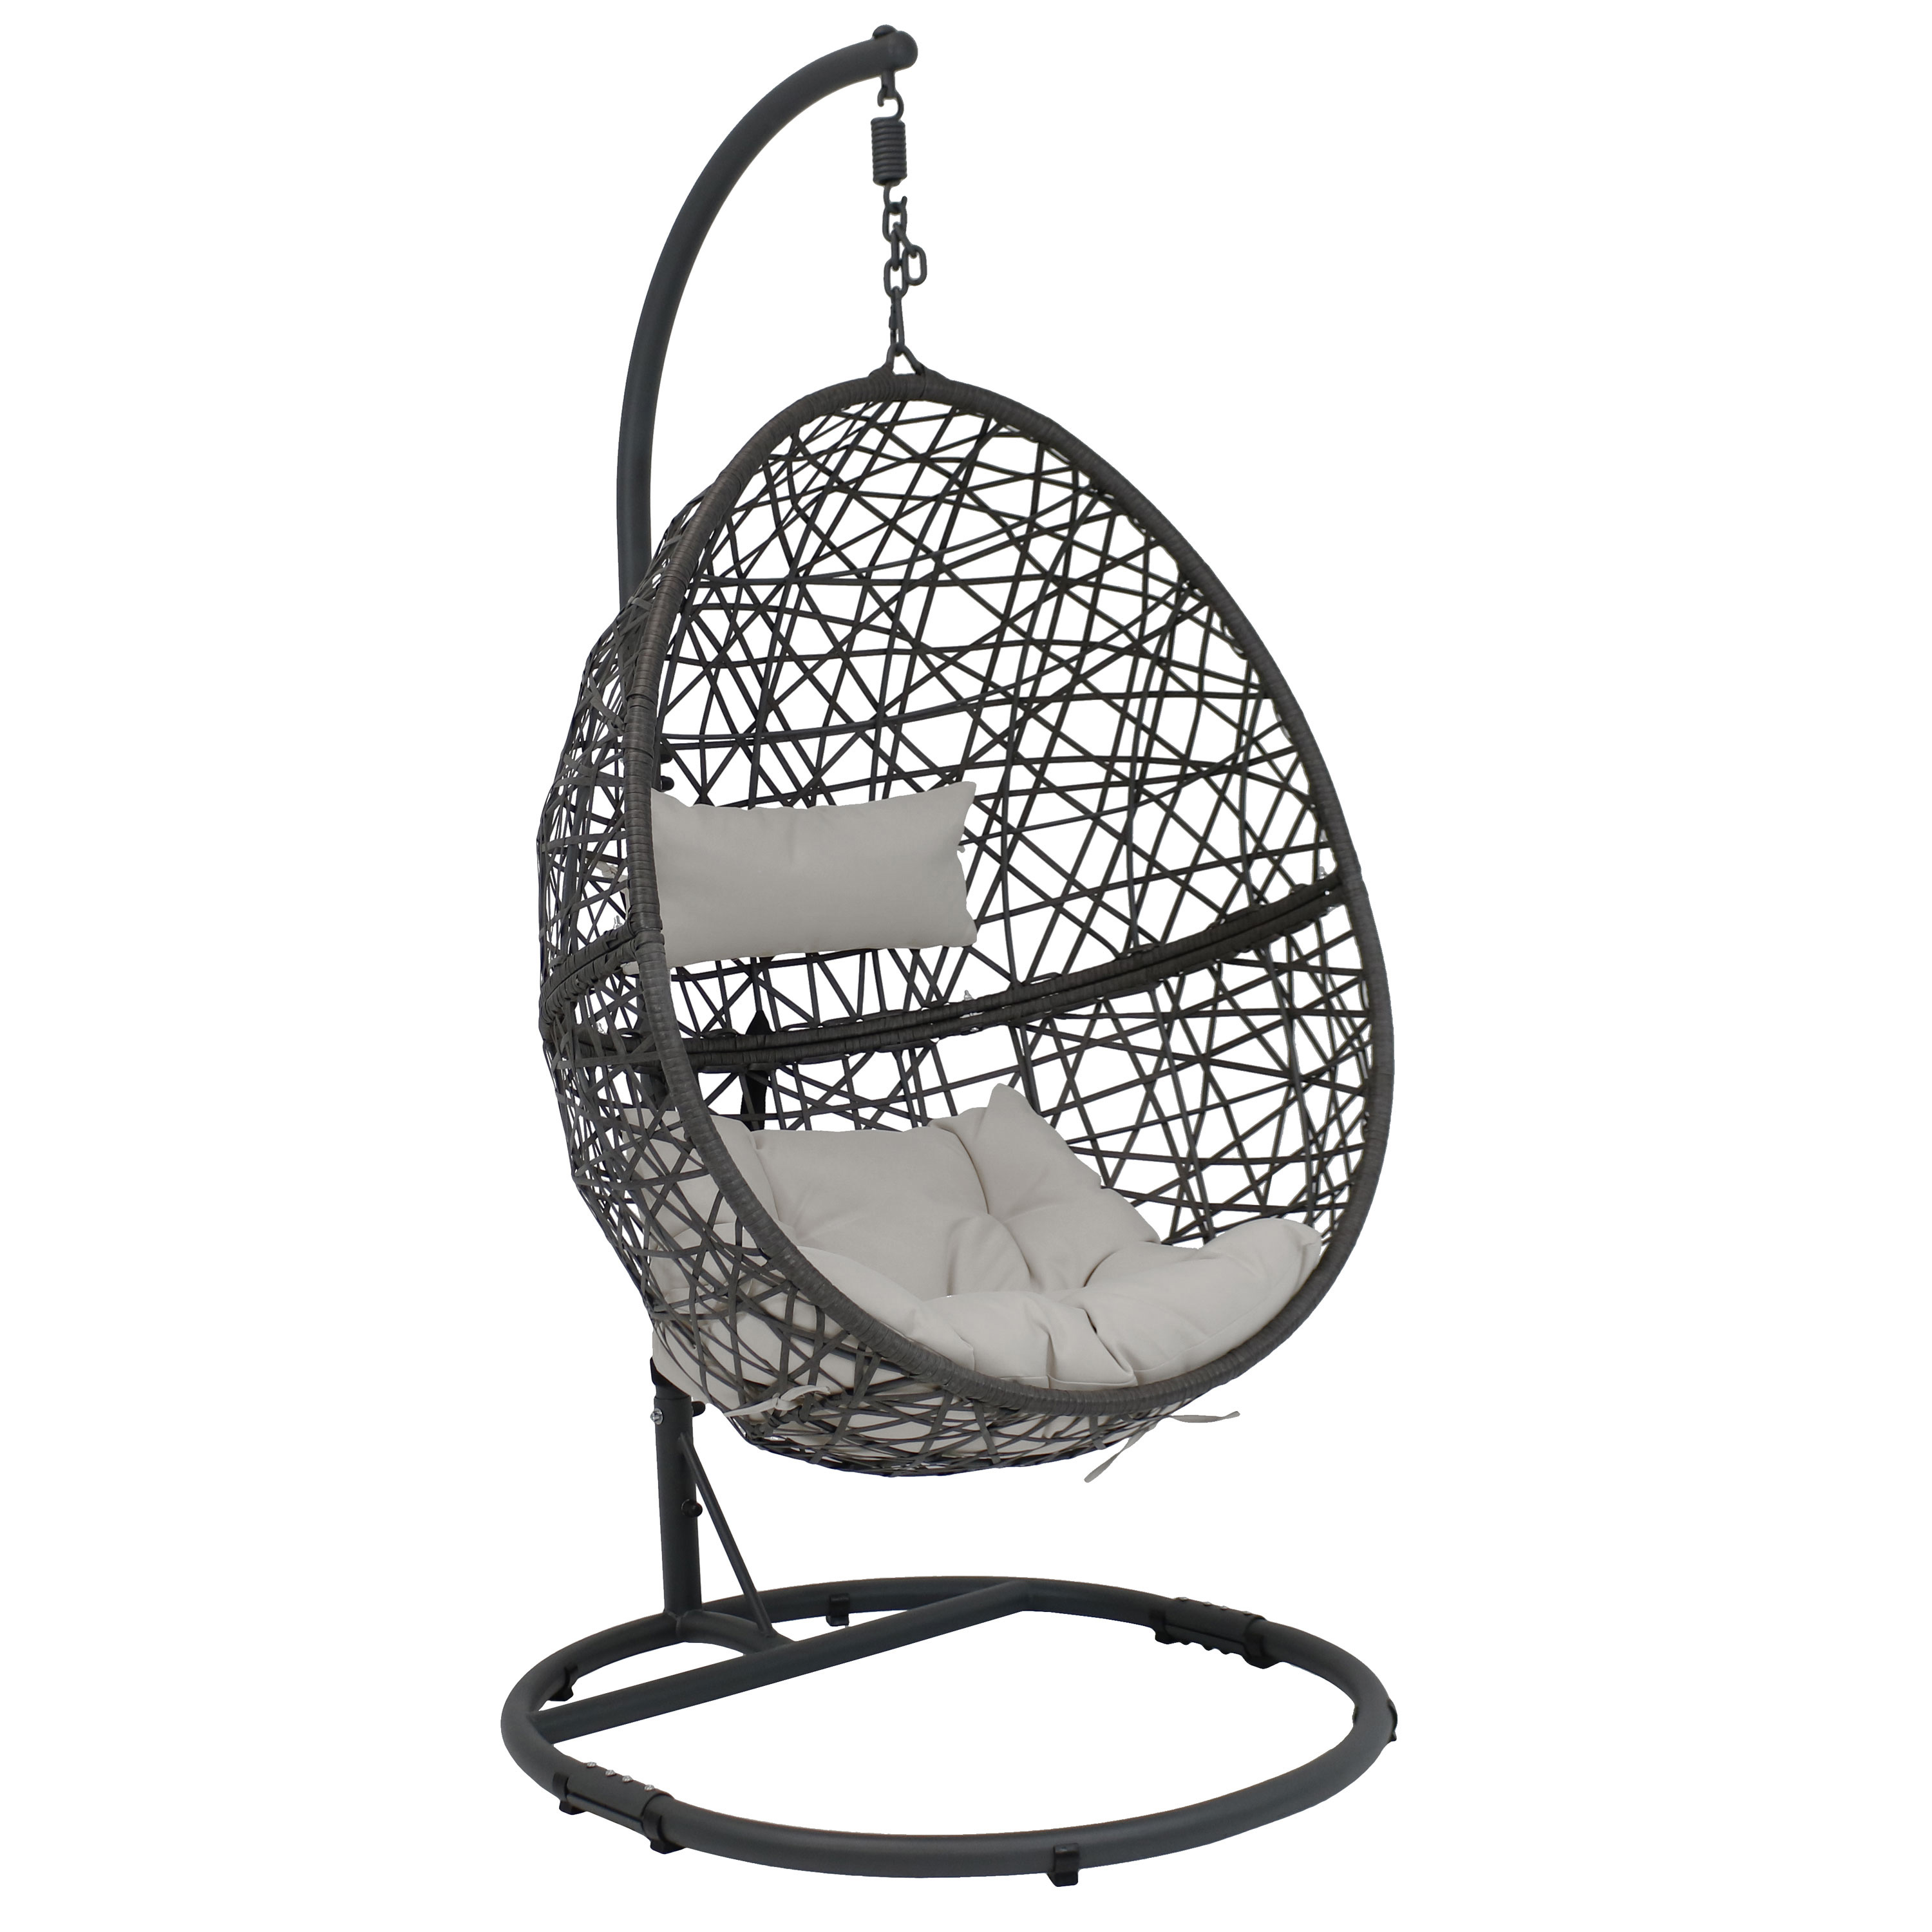 Sunnydaze Caroline Hanging Egg Chair with Steel Stand Set, Resin Wicker, Modern Design, Outdoor Use, Includes Cushion, Gray